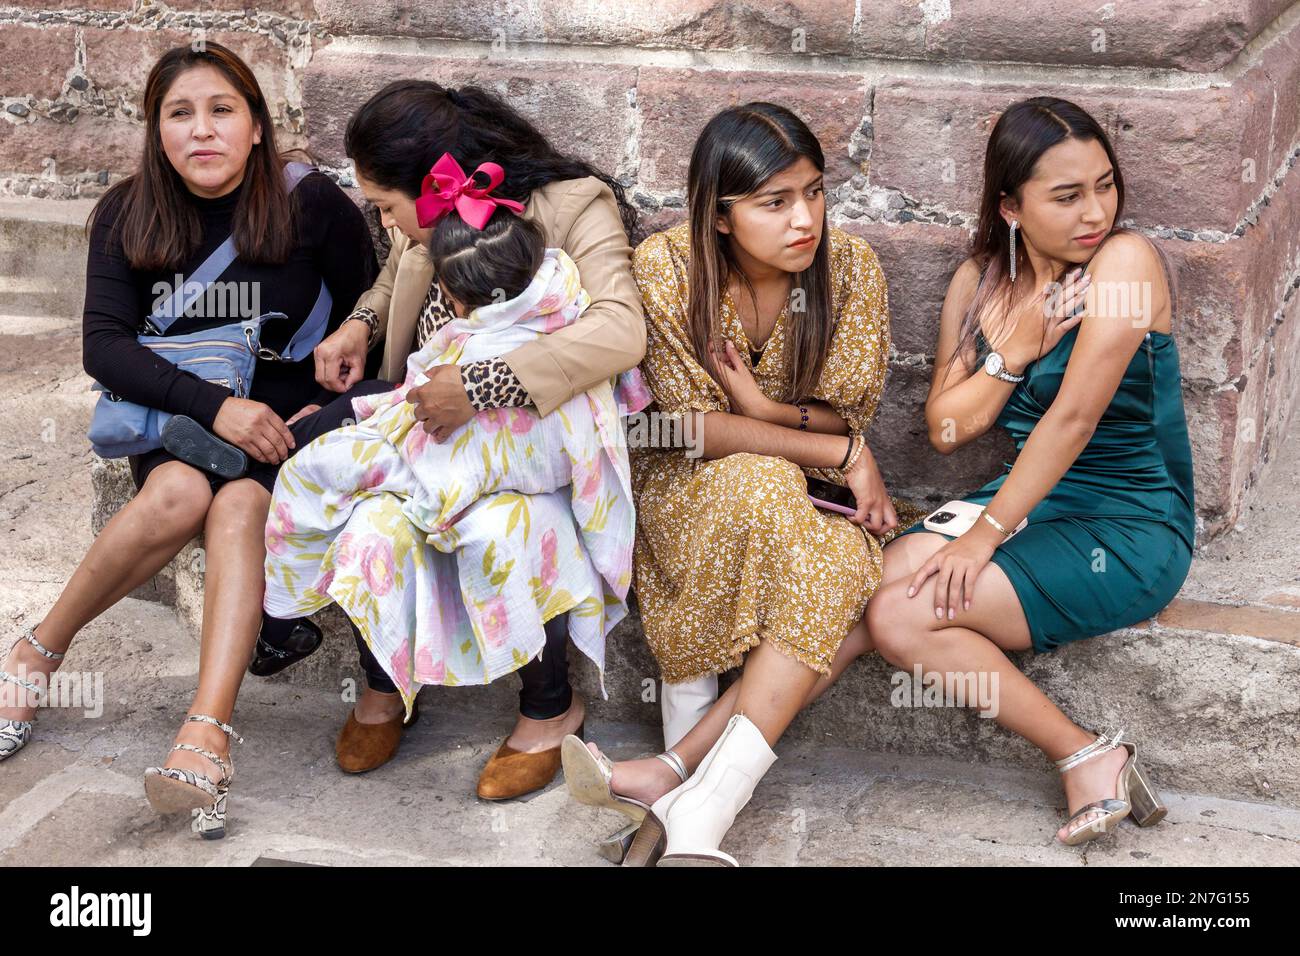 San Miguel de Allende Guanajuato Mexico,Historico Central historic center Zona Centro,teen teens teenage teenager teenagers,youth culture friends adol Stock Photo